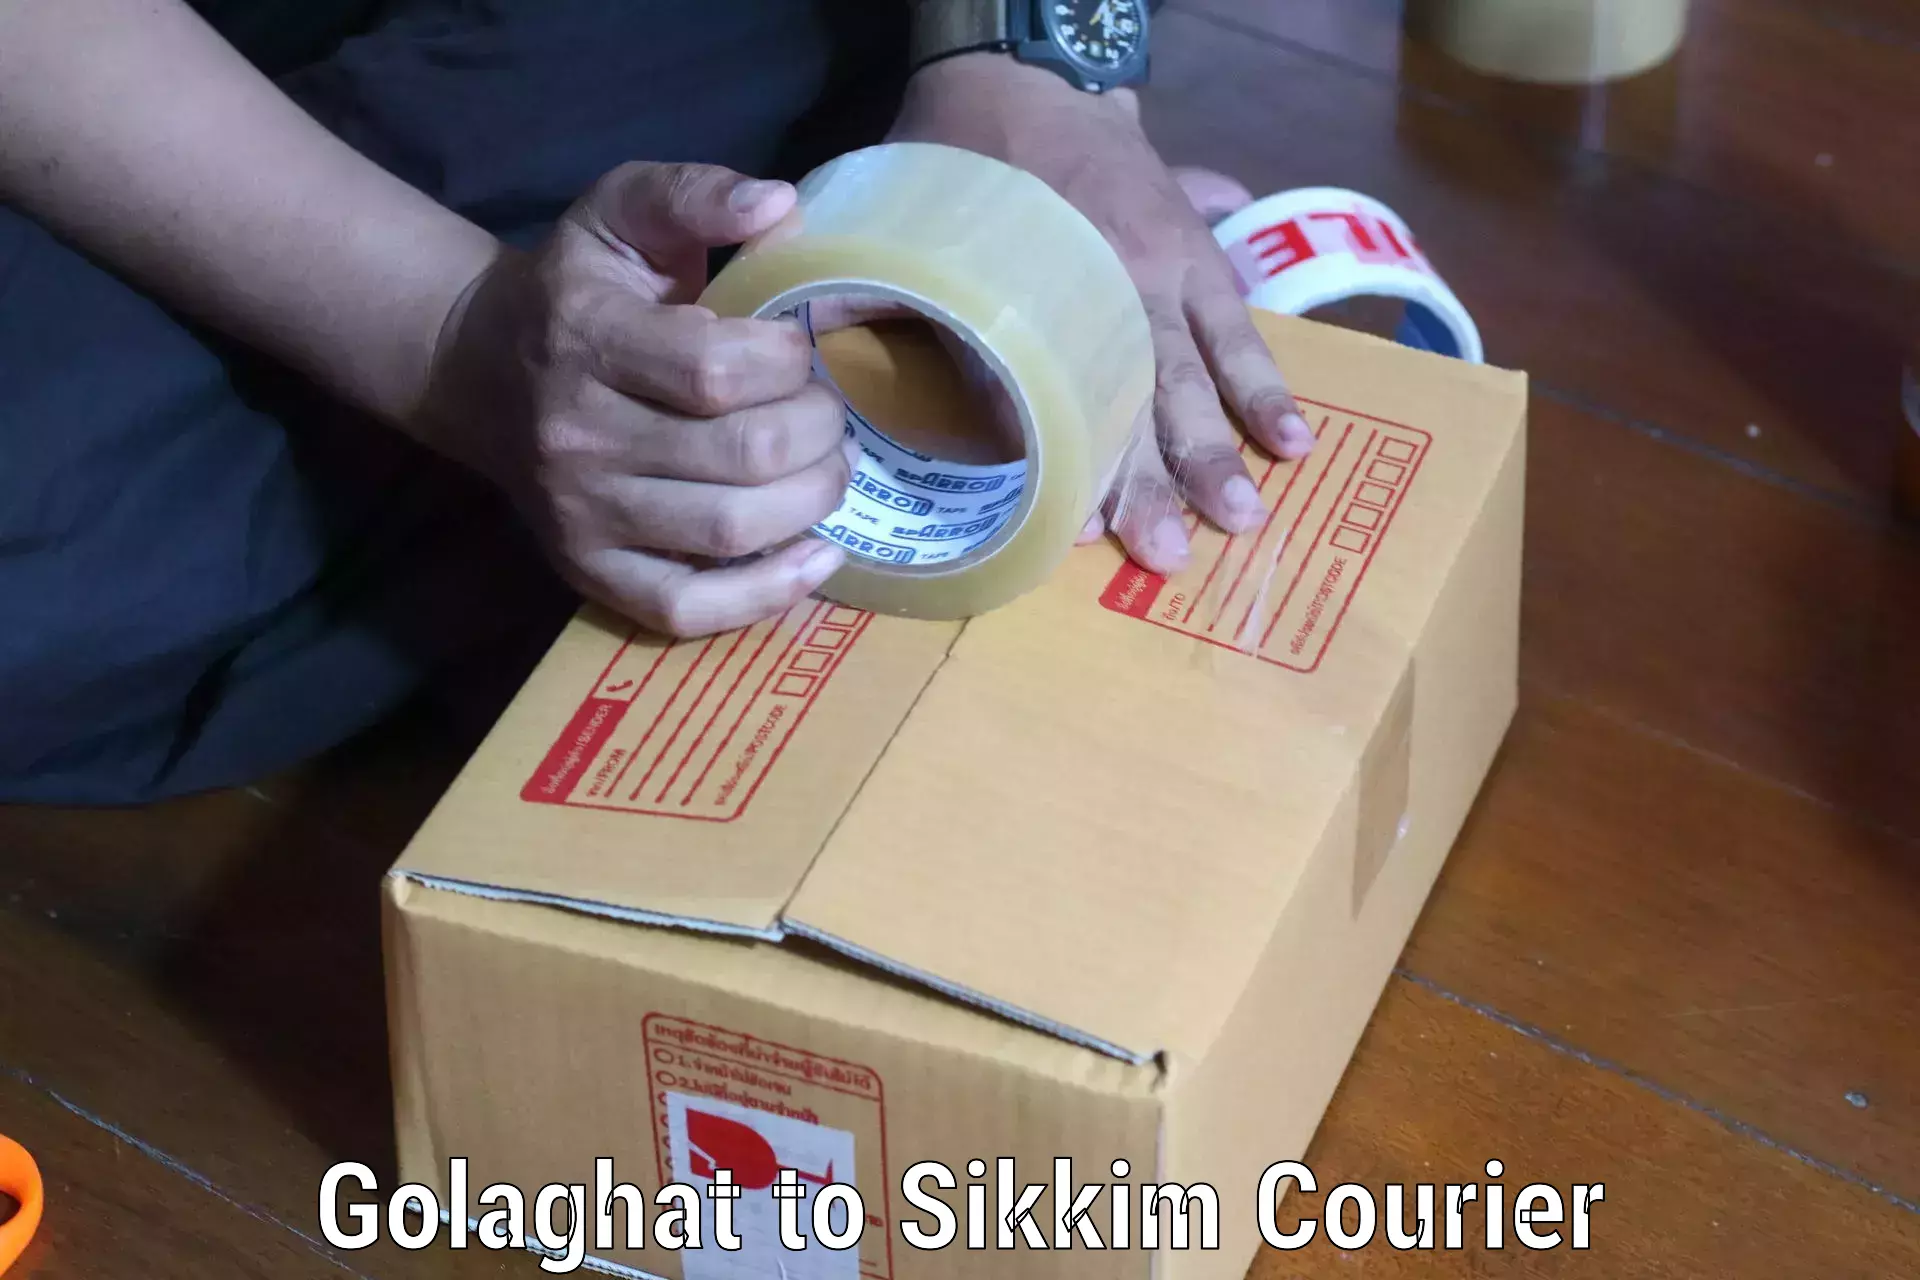 Global shipping solutions Golaghat to Gangtok